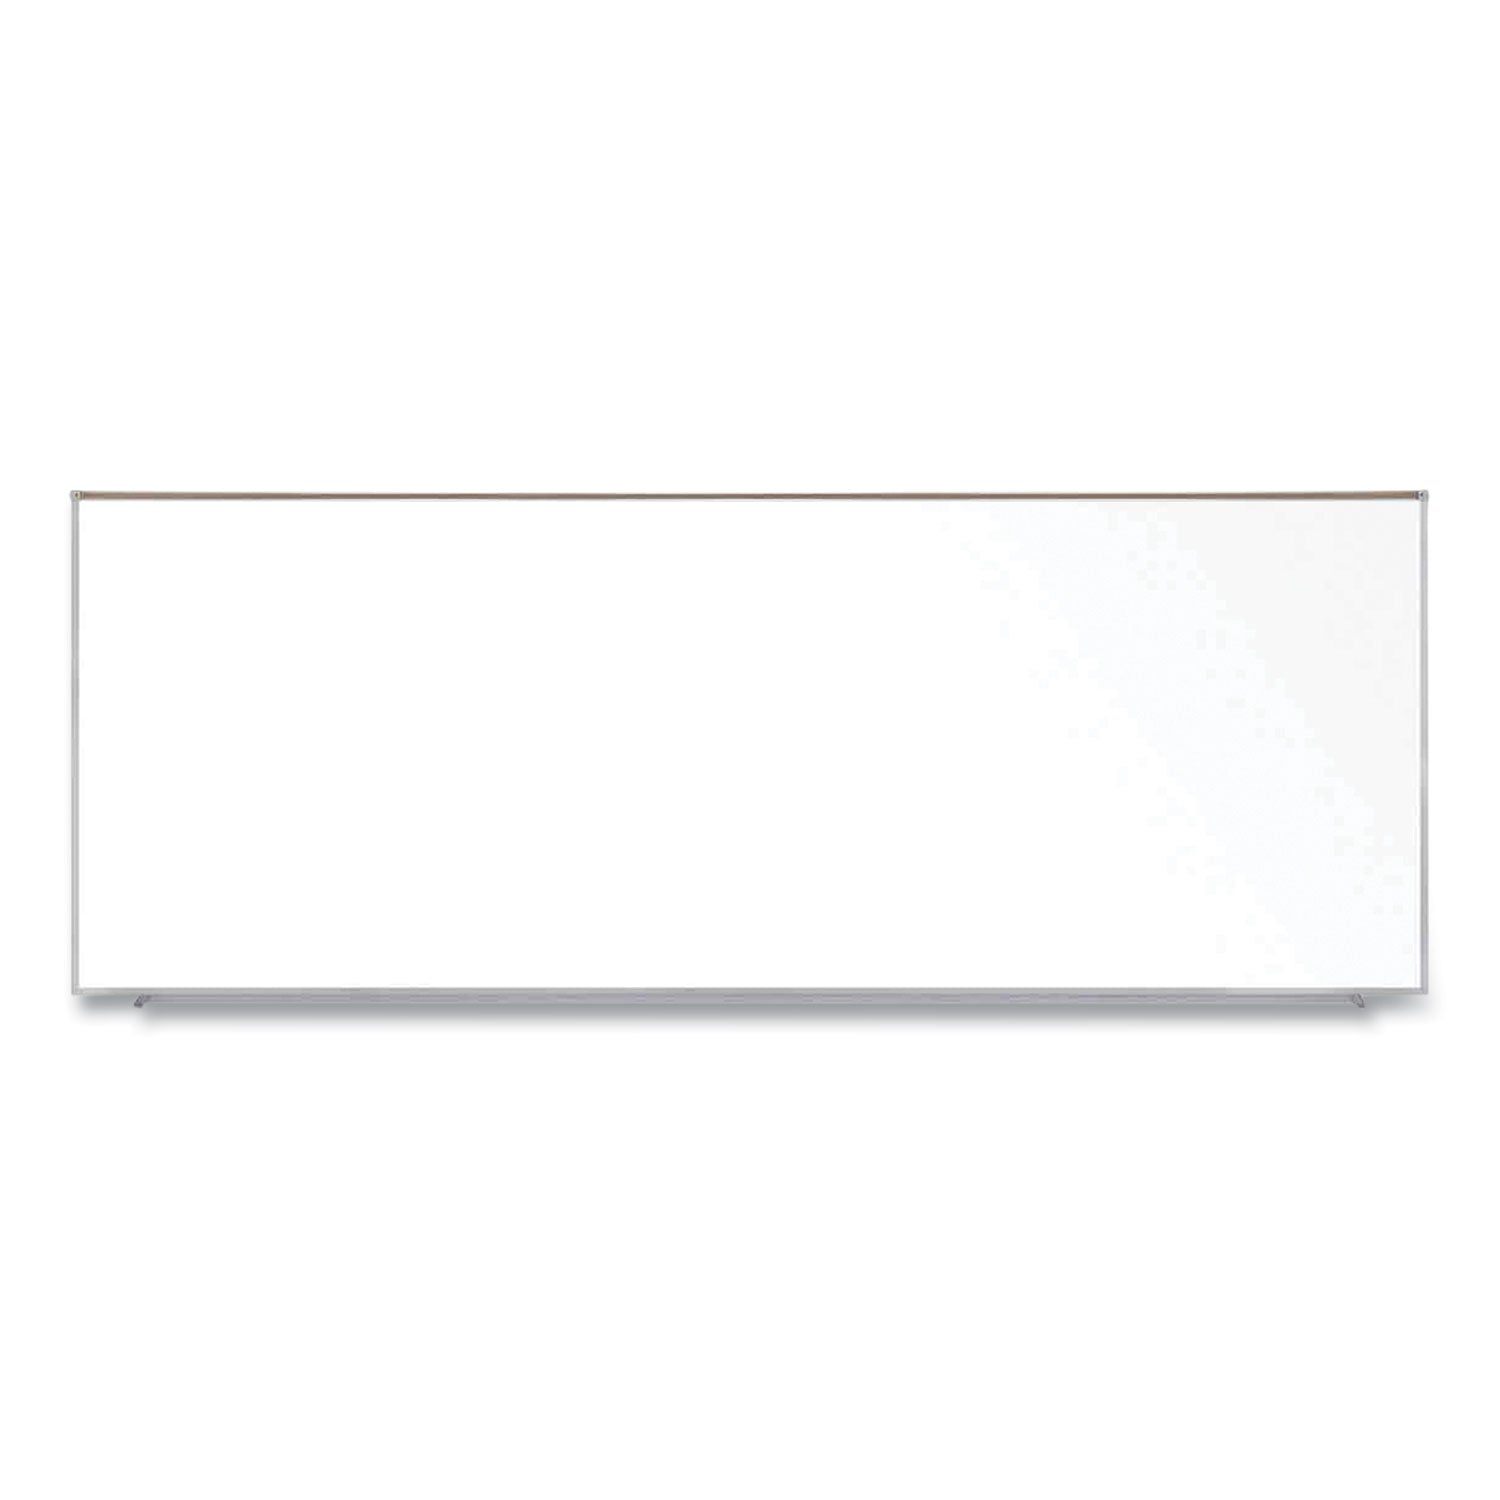 magnetic-porcelain-whiteboard-with-satin-aluminum-frame-and-map-rail-14459-x-6047-white-surface-ships-in-7-10-bus-days_ghem1p5121m - 1